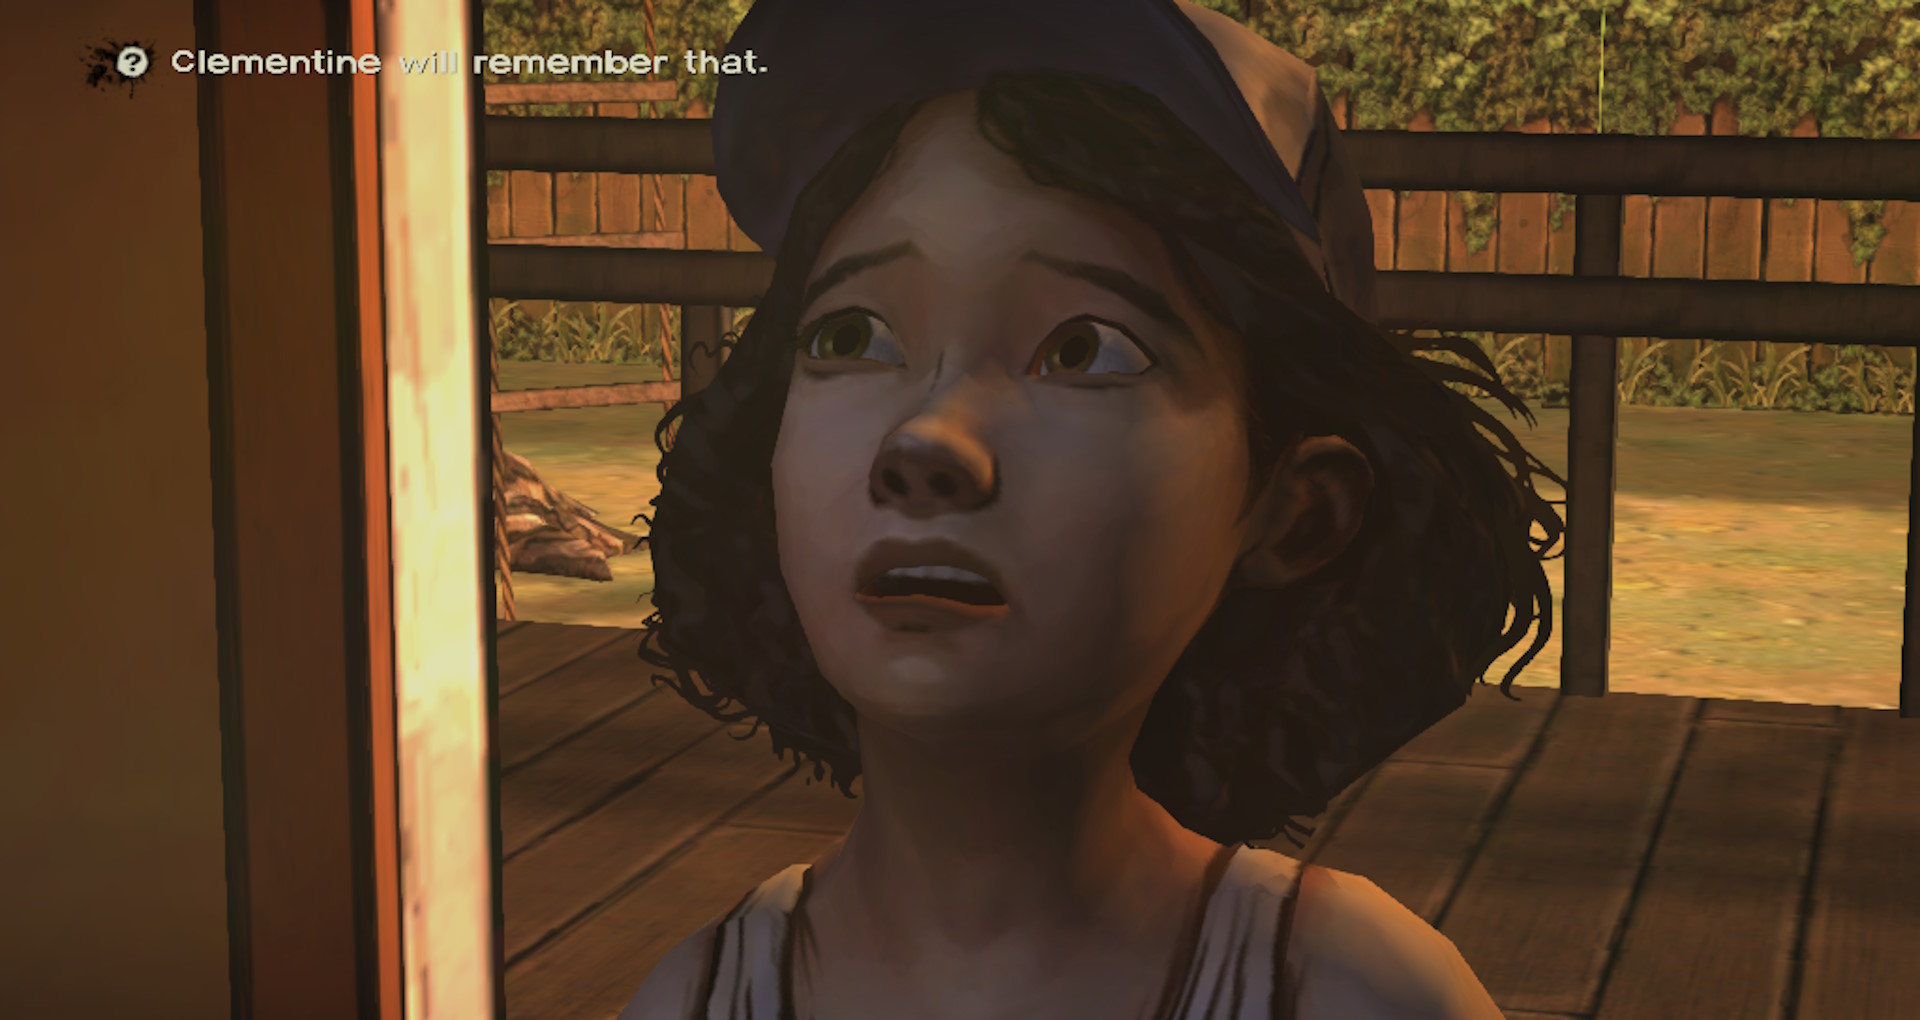 Telltale's The Walking Dead screenshot: Clementine will remember that.